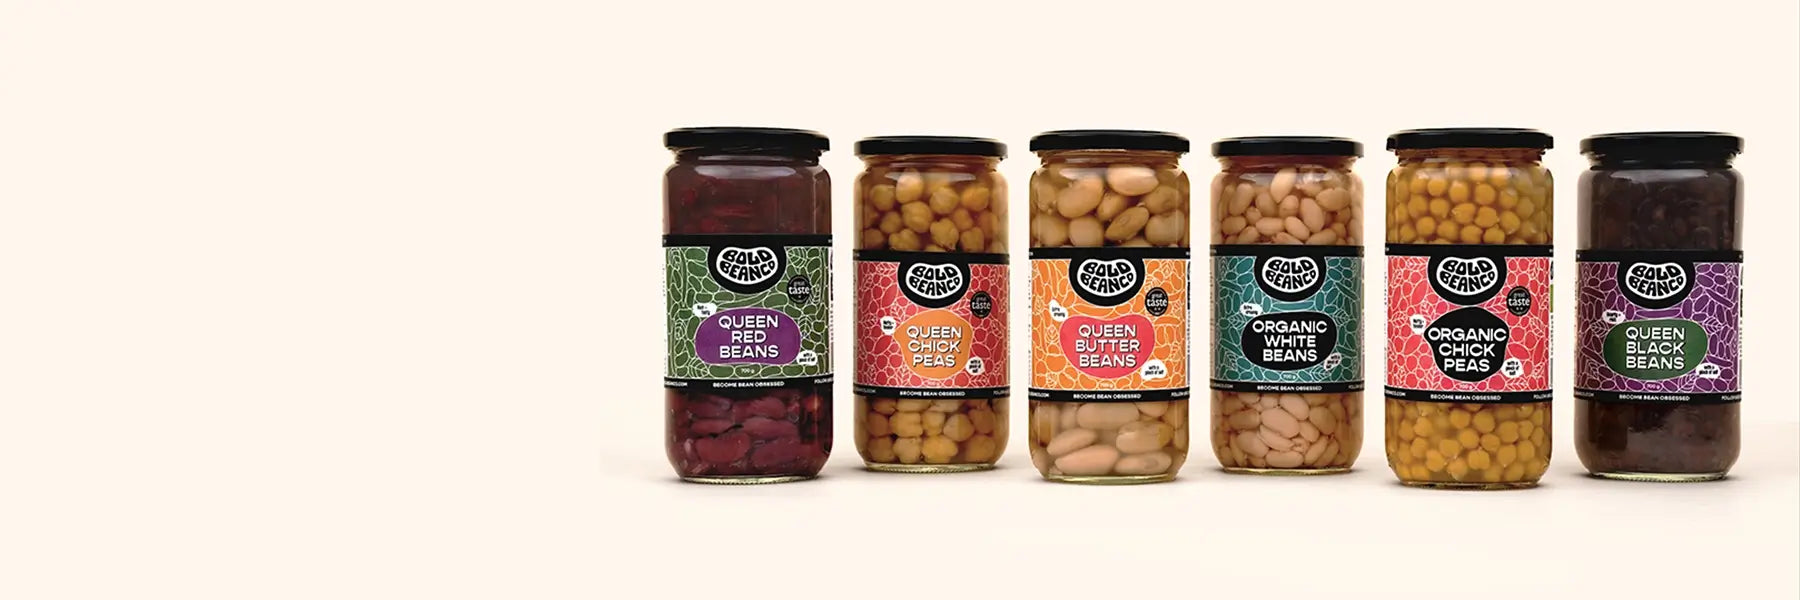 Bold Bean Co 6 Jars of beans and pulses